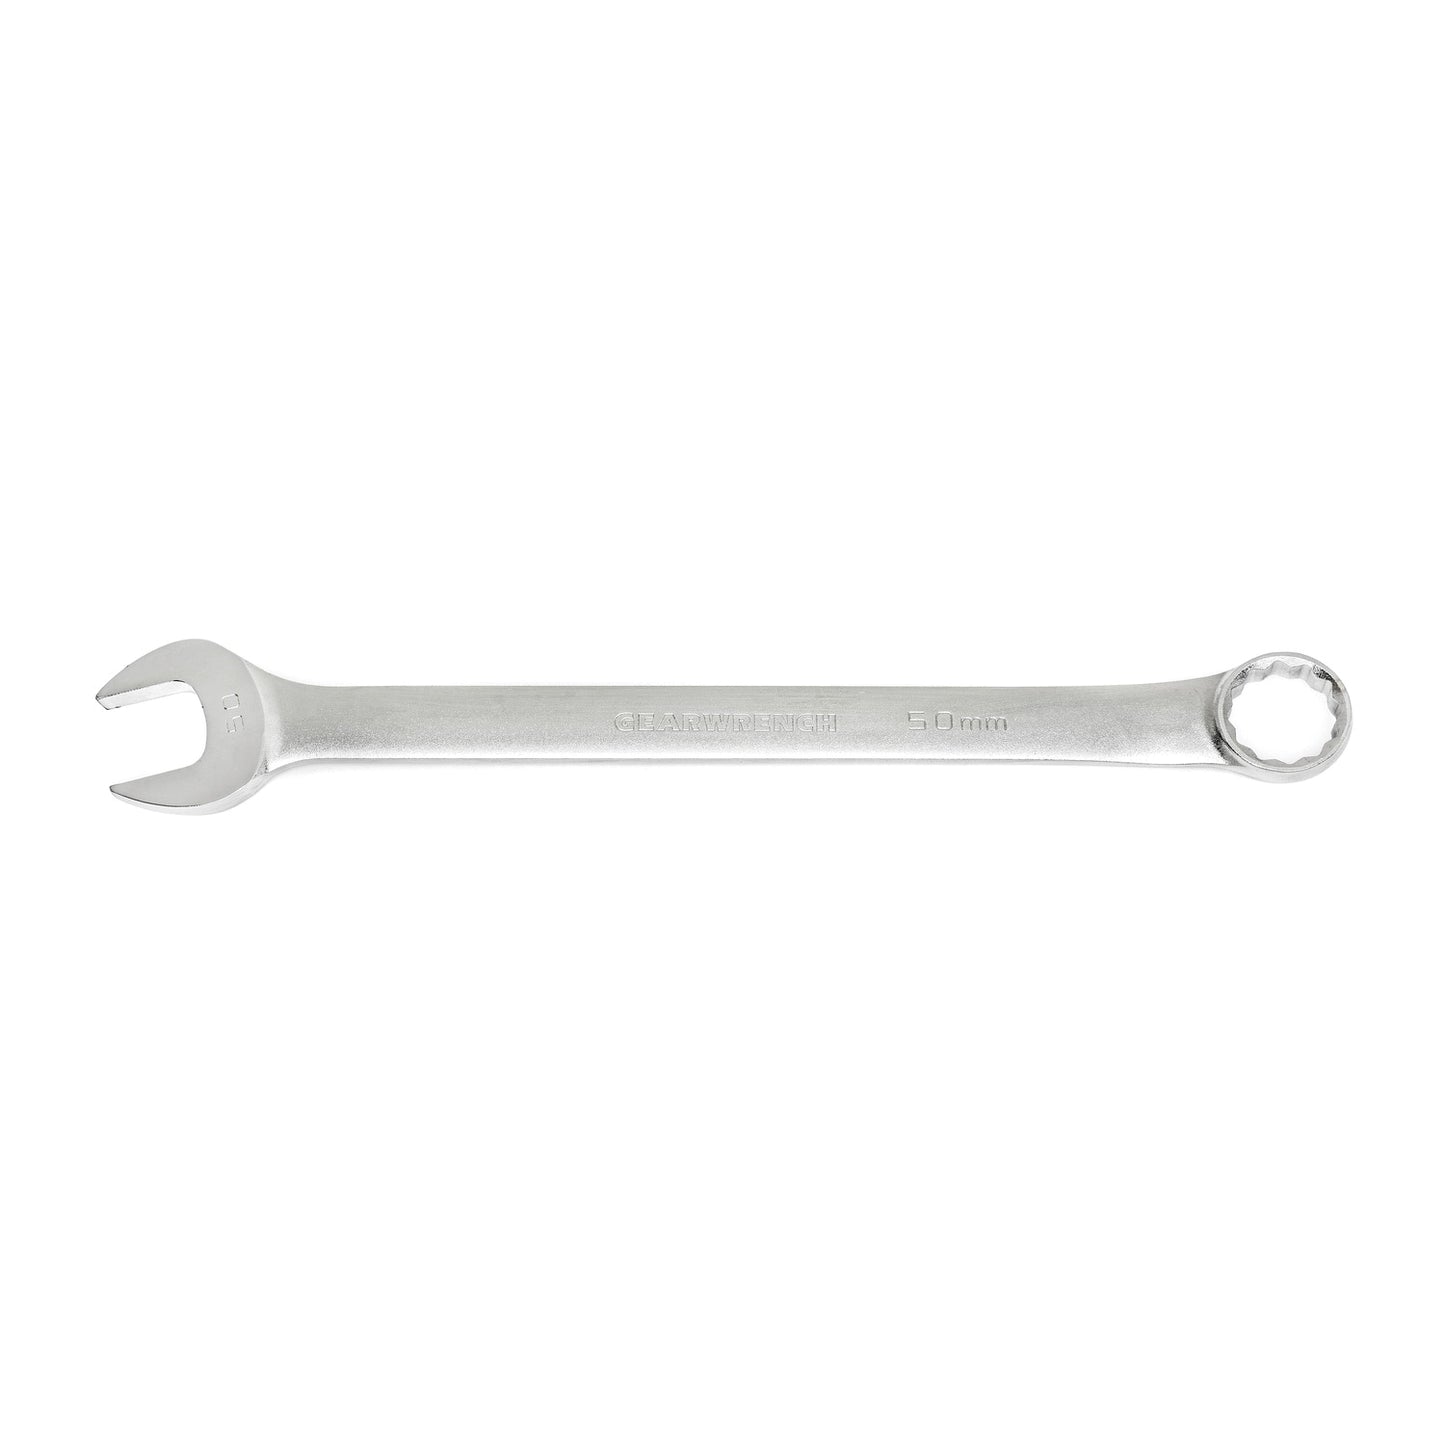 GEARWRENCH® 81819 Long Pattern Combination Wrench  1-11/16 in Wrench